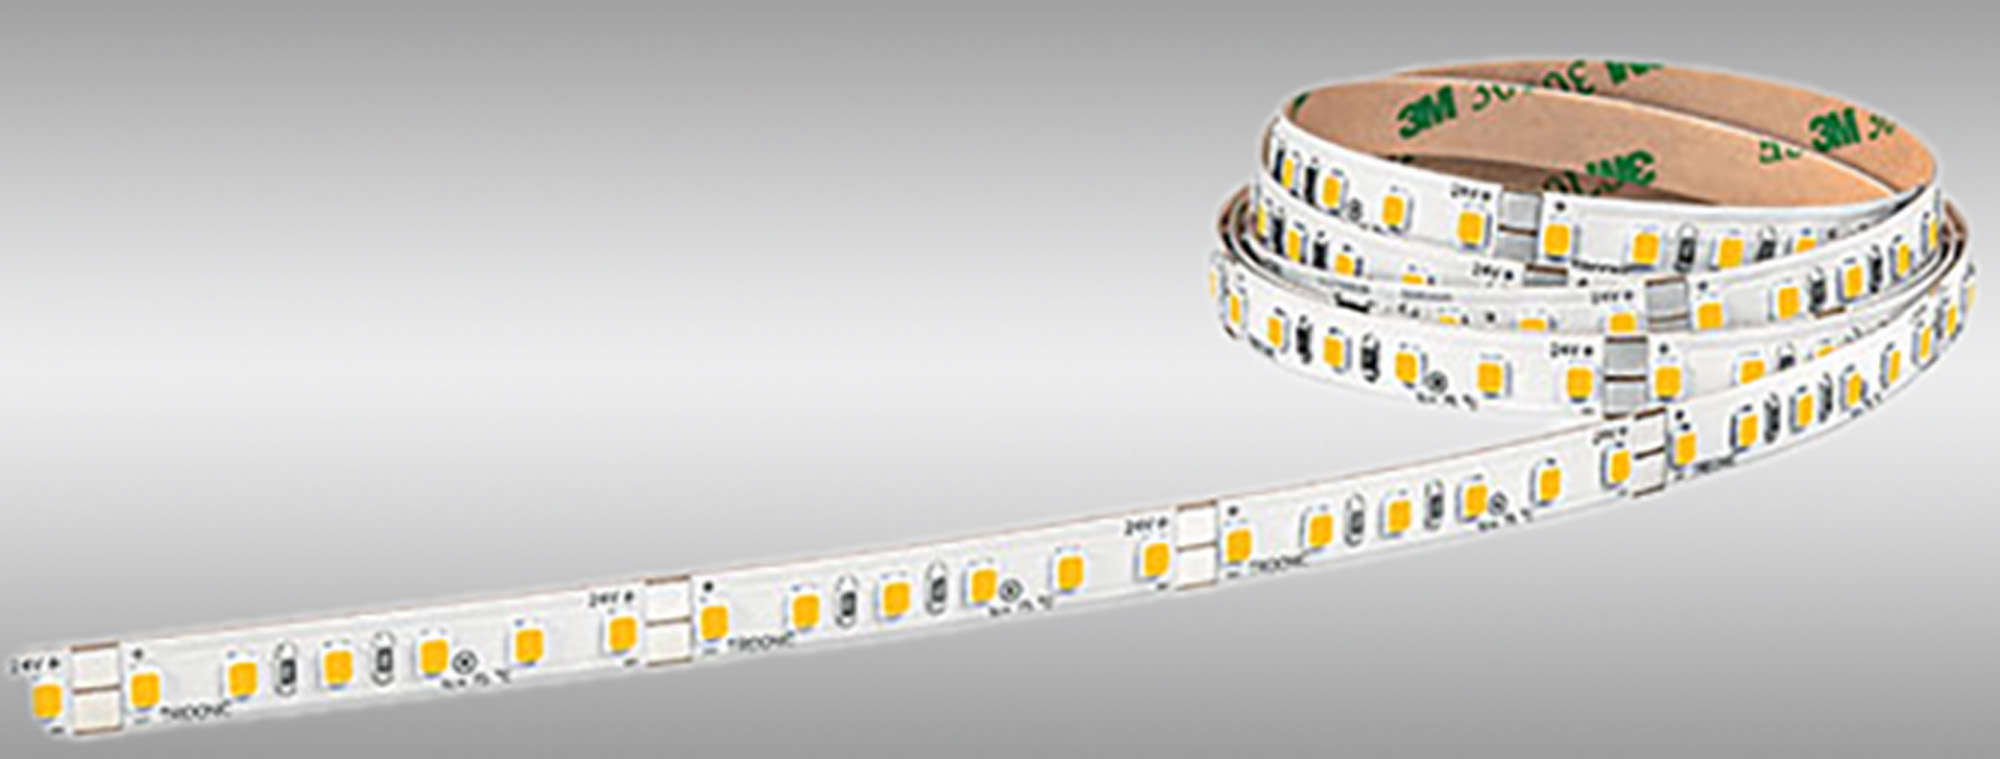 LLE FLEX Components Tridonic LED Boards